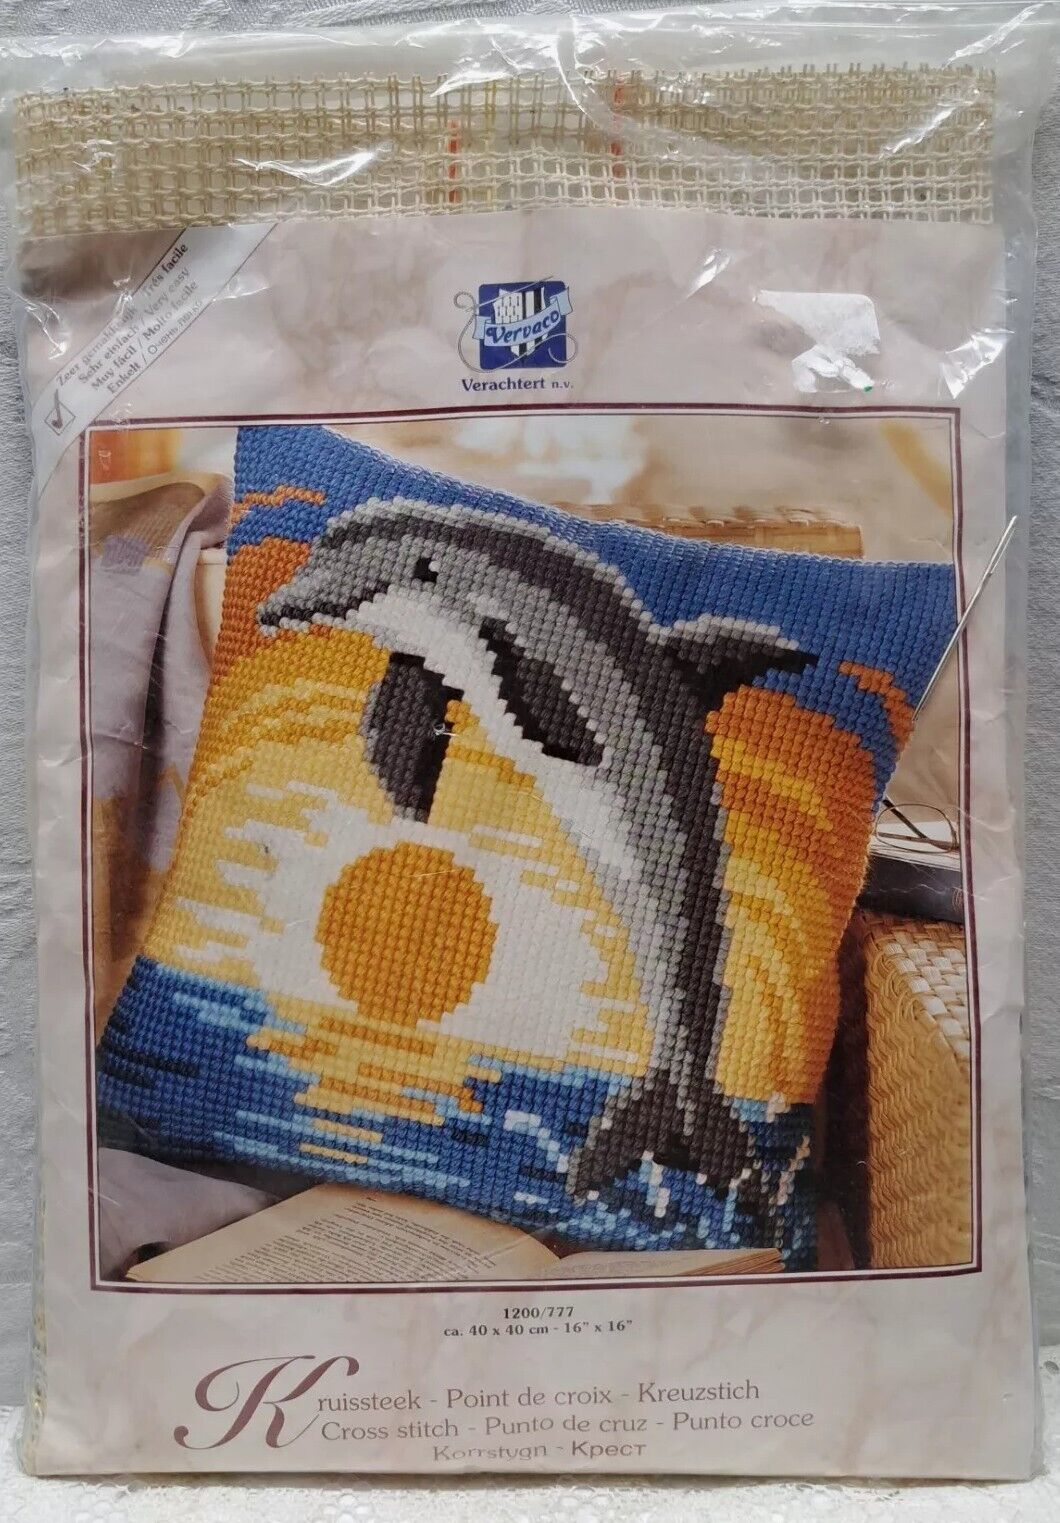 VTG VERVACO 16x16 DOLPHIN SUNSET Cross Stitch PILLOW KIT New Old Stock 